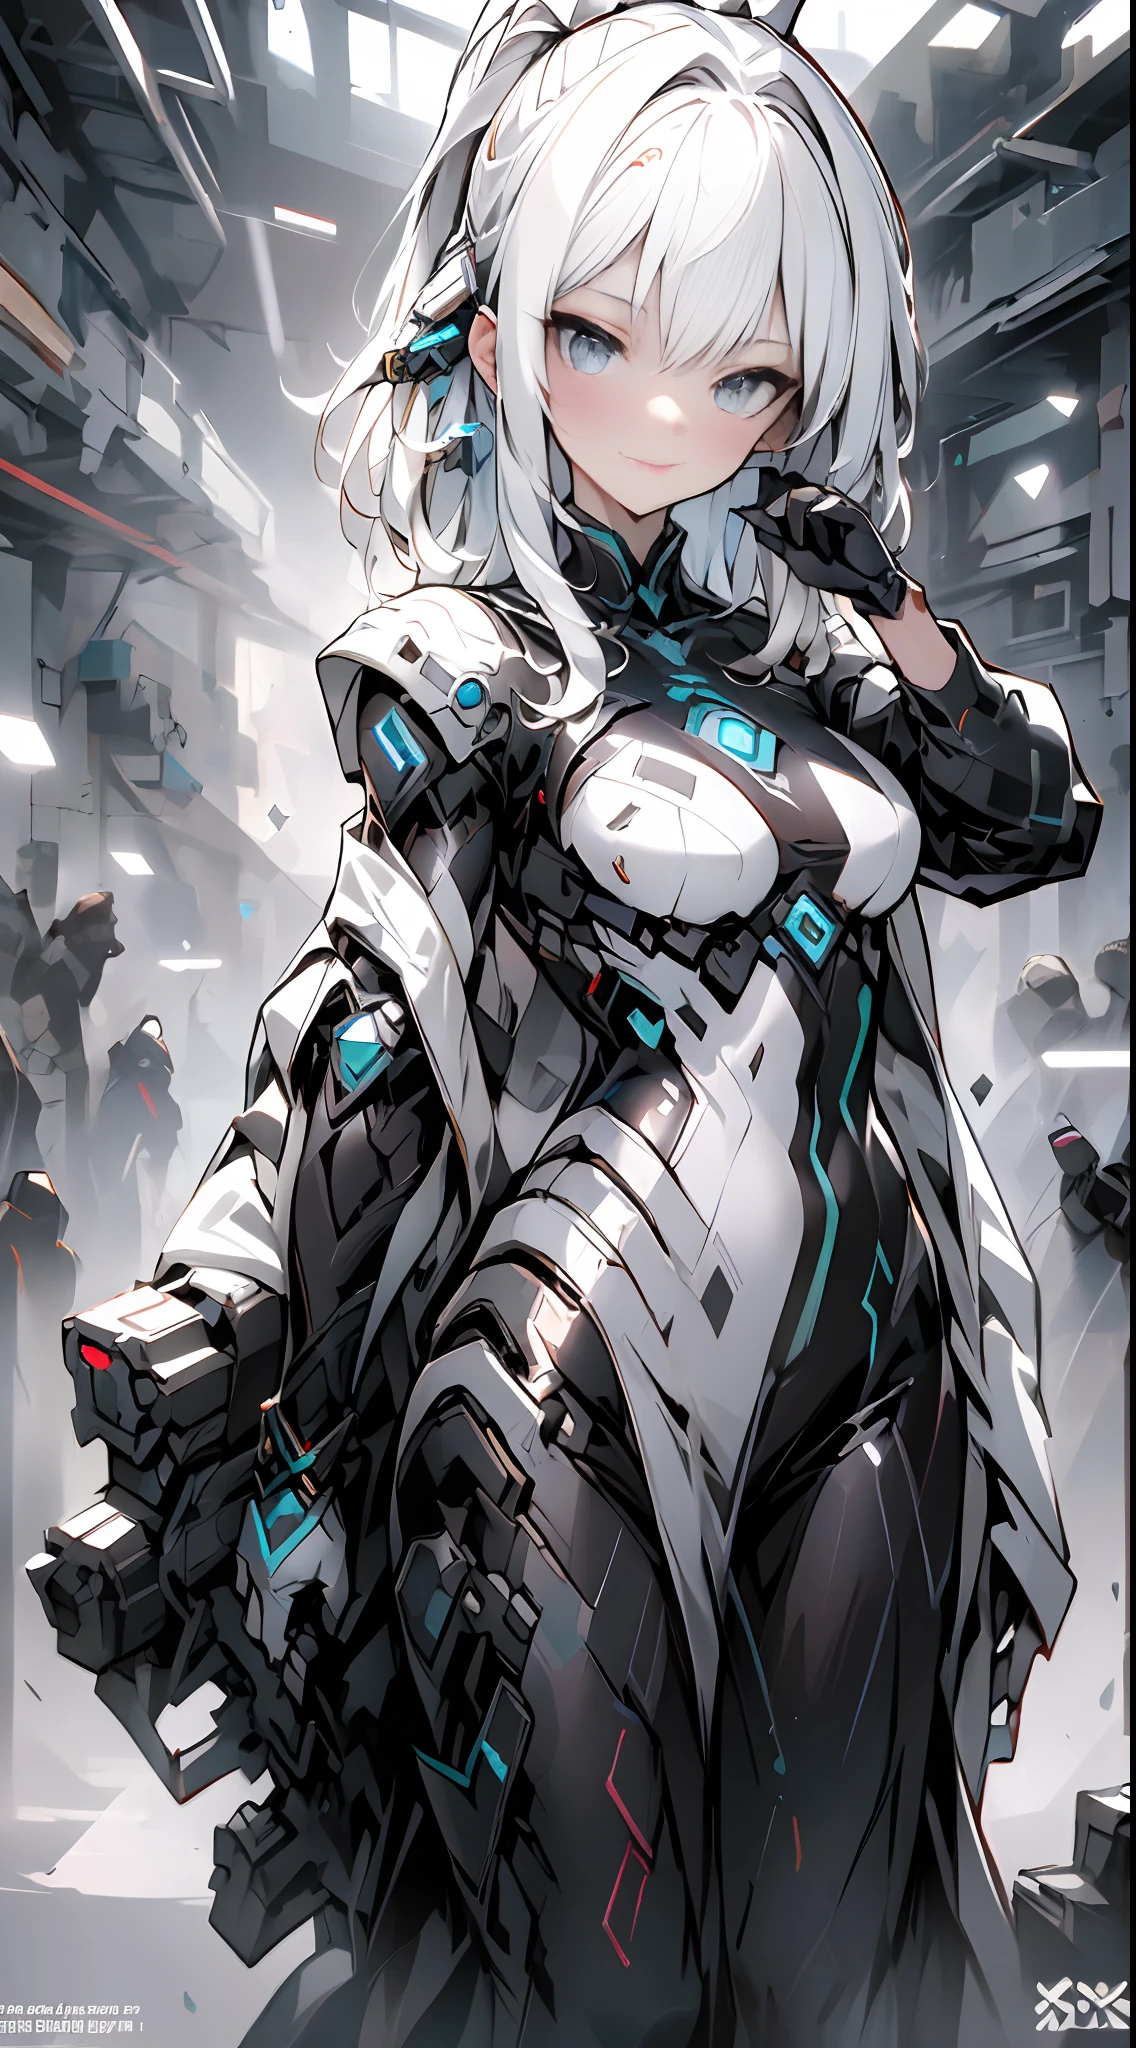 1 adult woman, stand alone, High detail mature face, long ponytail silver hair, gold eyes, white china dress with black strip, wear black head band, high res, ultra sharp, 8k, masterpiece, looking at viewer, long black gloves, Sharp eyes, holding a rifle weapon. ((Best quality)), ((masterpiece)), 3D, HDR (High Dynamic Range),Ray Tracing, NVIDIA RTX, Super-Resolution, Unreal 5,Subsurface scattering, PBR Texturing, Post-processing, Anisotropic Filtering, Depth-of-field, Maximum clarity and sharpness, Multi-layered textures, Albedo and Specular maps, Surface shading, Accurate simulation of light-material interaction, Perfect proportions, Octane Render, Two-tone lighting, Wide aperture, Low ISO, White balance, Rule of thirds,8K RAW, Aura, masterpiece, best quality, Mysterious expression, magical effects like sparkles or energy, flowing robes or enchanting attire, mechanic creatures or mystical background, rim lighting, side lighting, cinematic light, ultra high res, 8k uhd, film grain, best shadow, delicate, RAW, light particles, detailed skin texture, detailed cloth texture, beautiful face, fighting stance